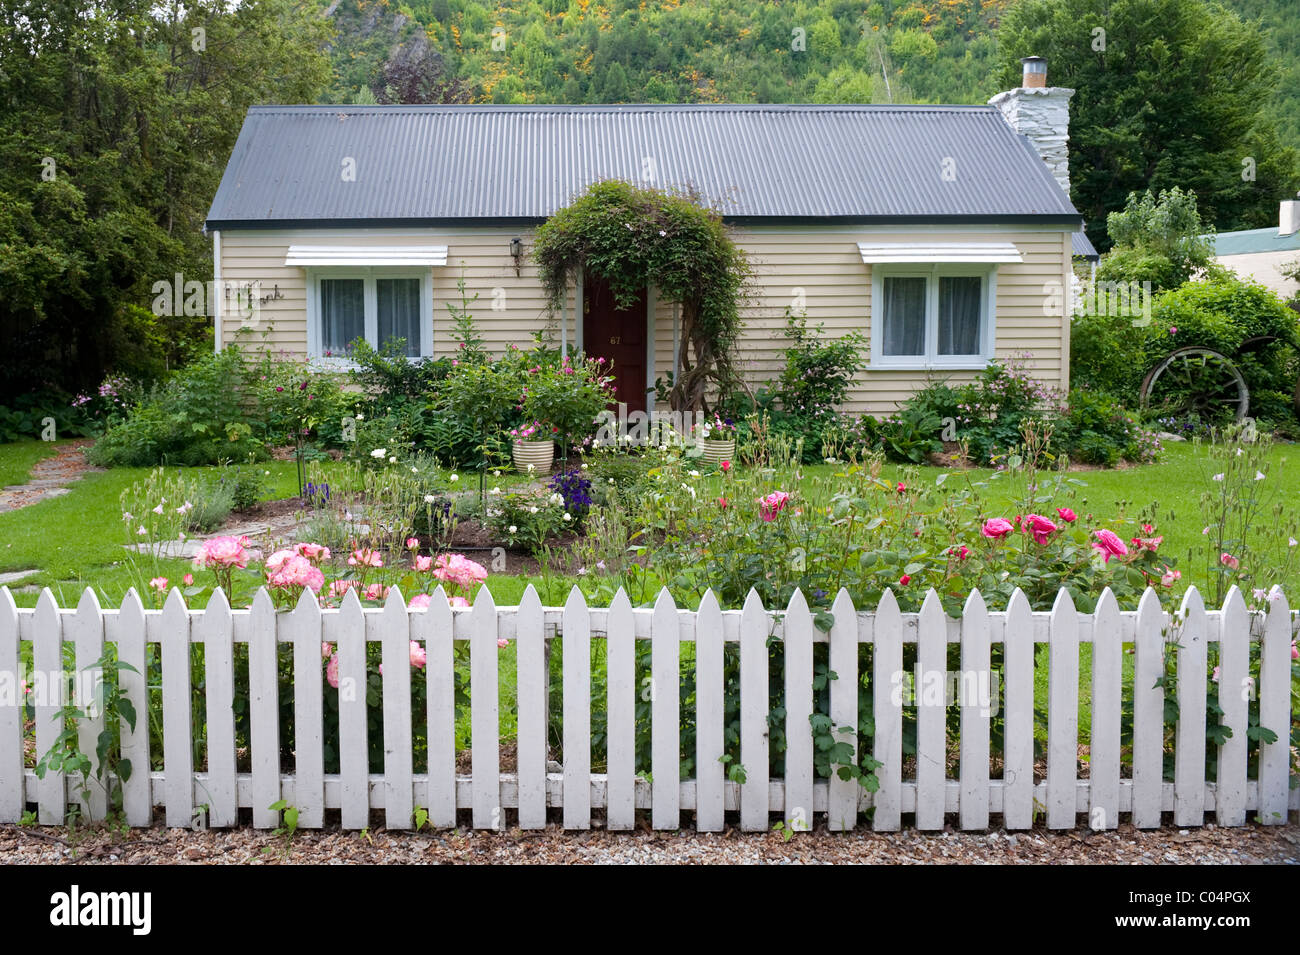 A simple weather boarded bungalow with rose garden and white picket fence at Arrowtown, New Zealand Stock Photo